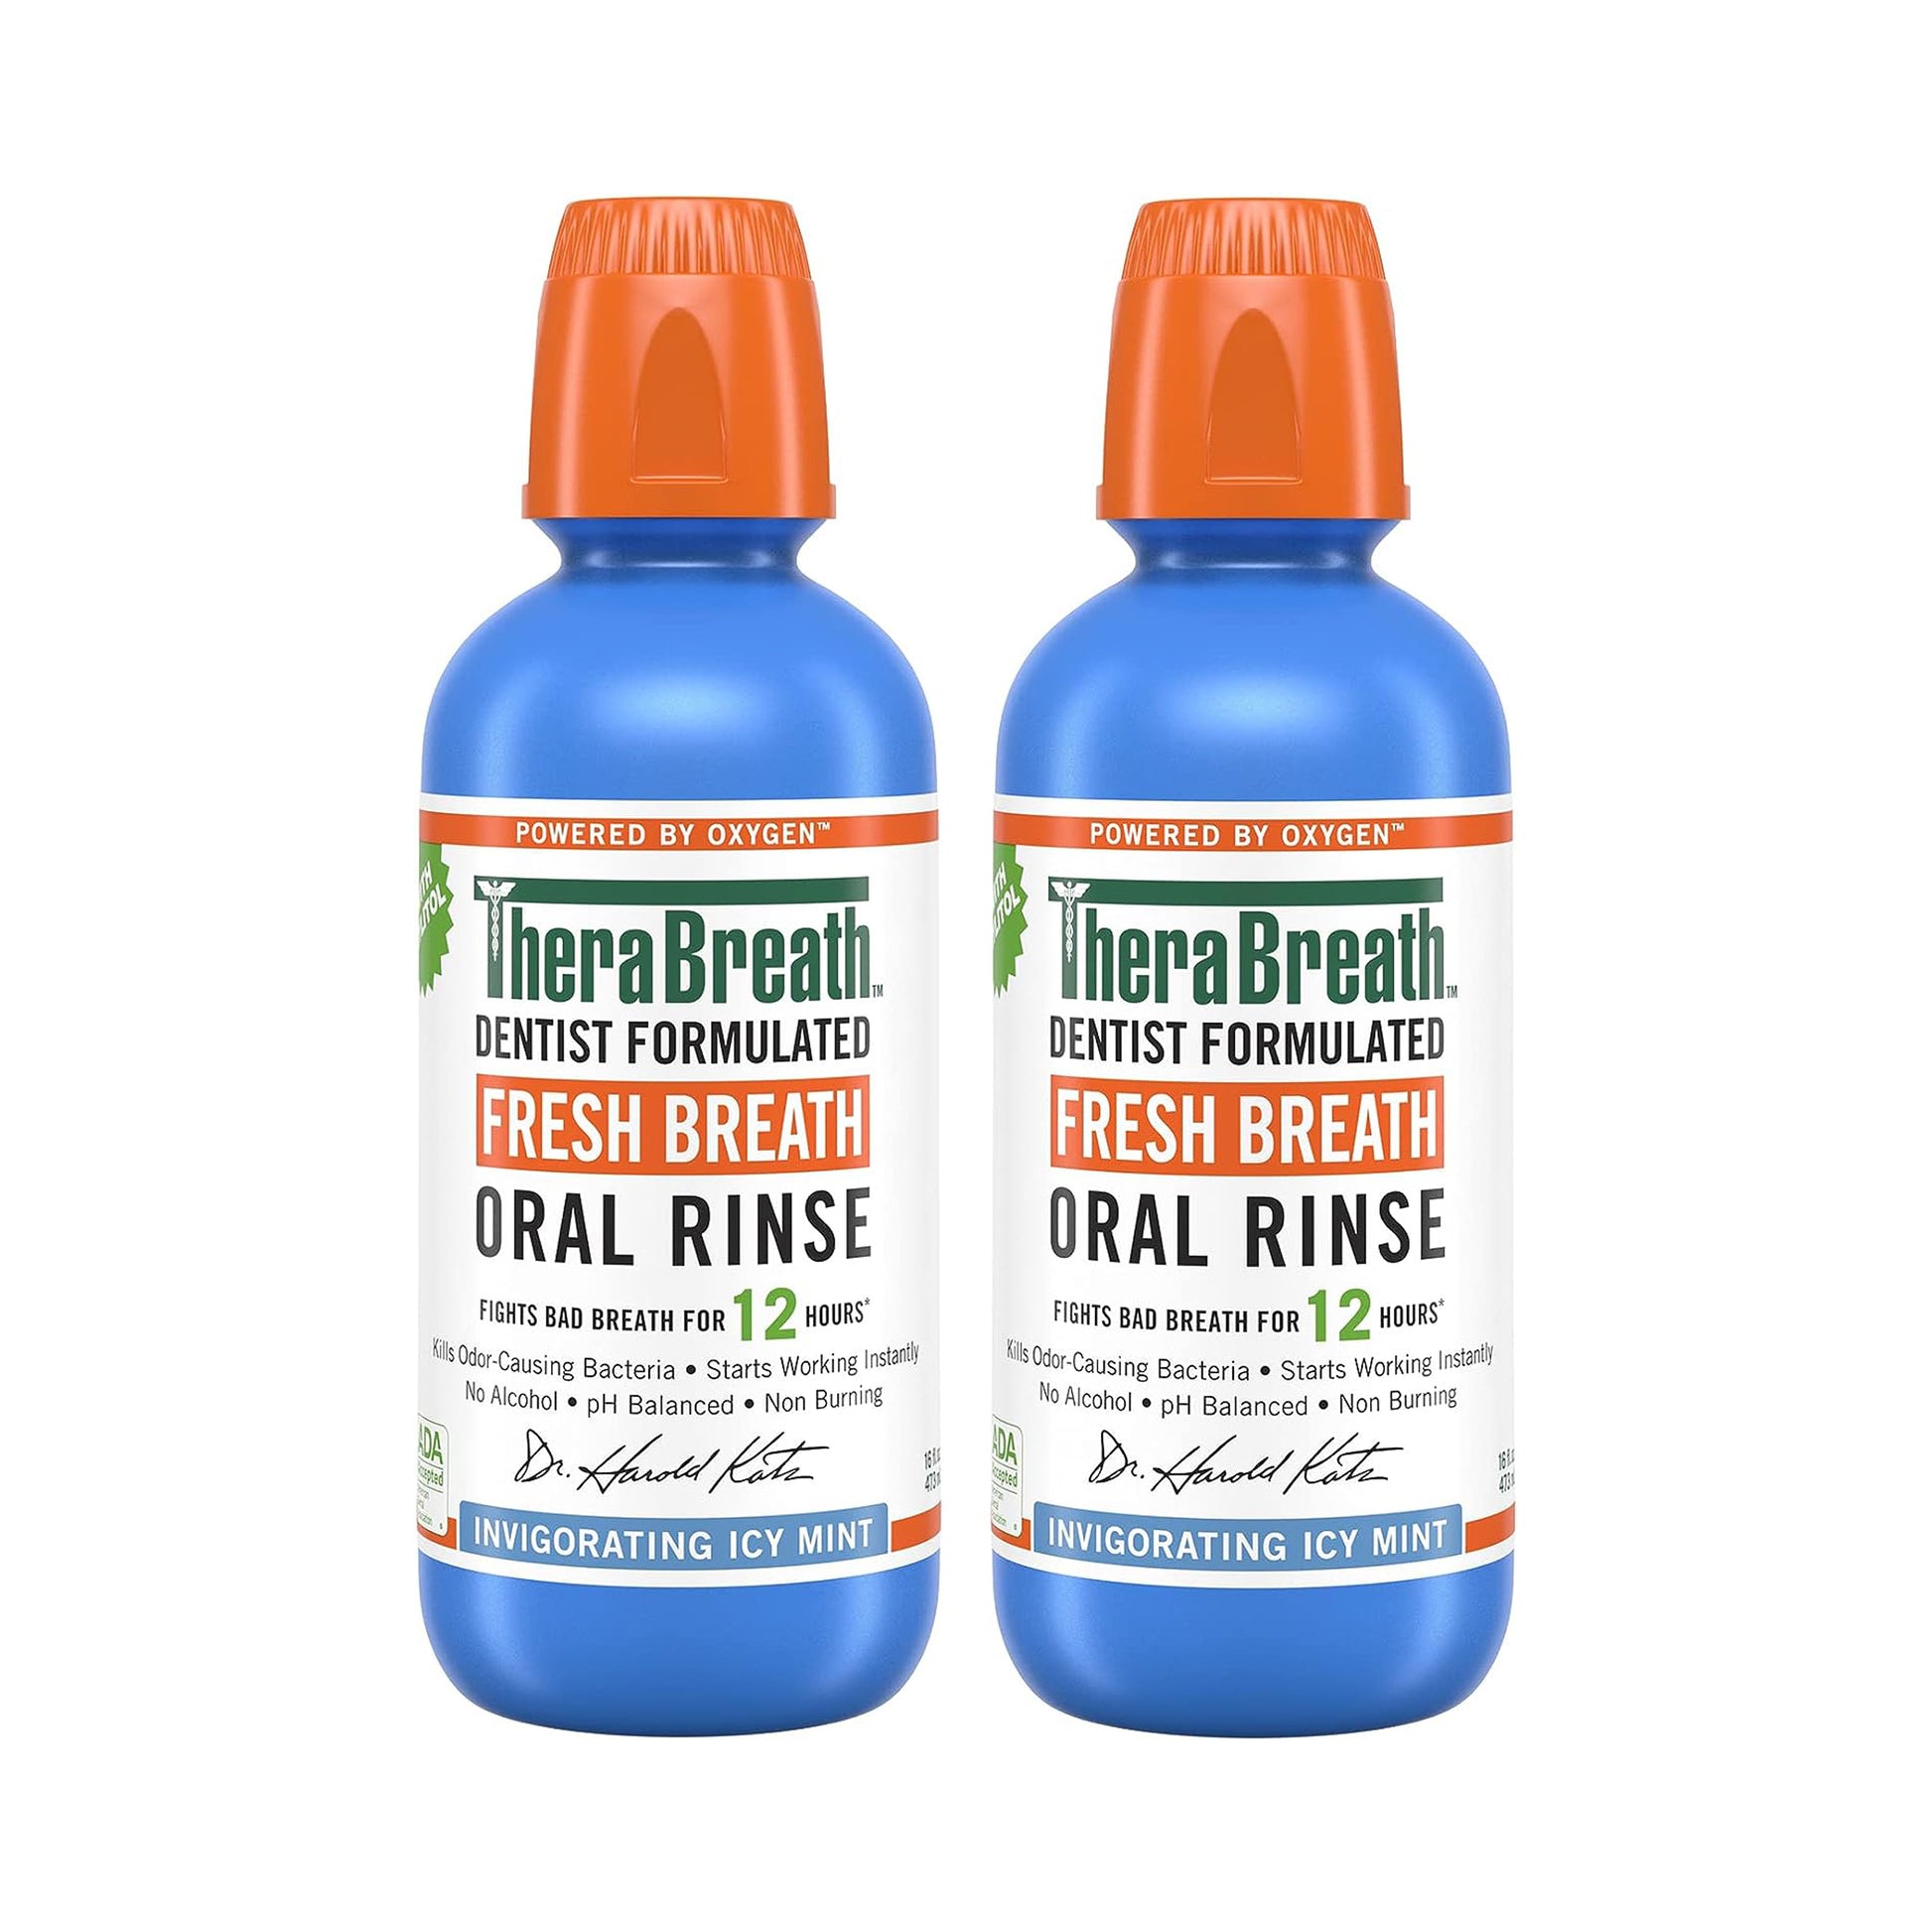 TheraBreath Oral Rinse Icy Mint Flavor 473 mL Pack of 2